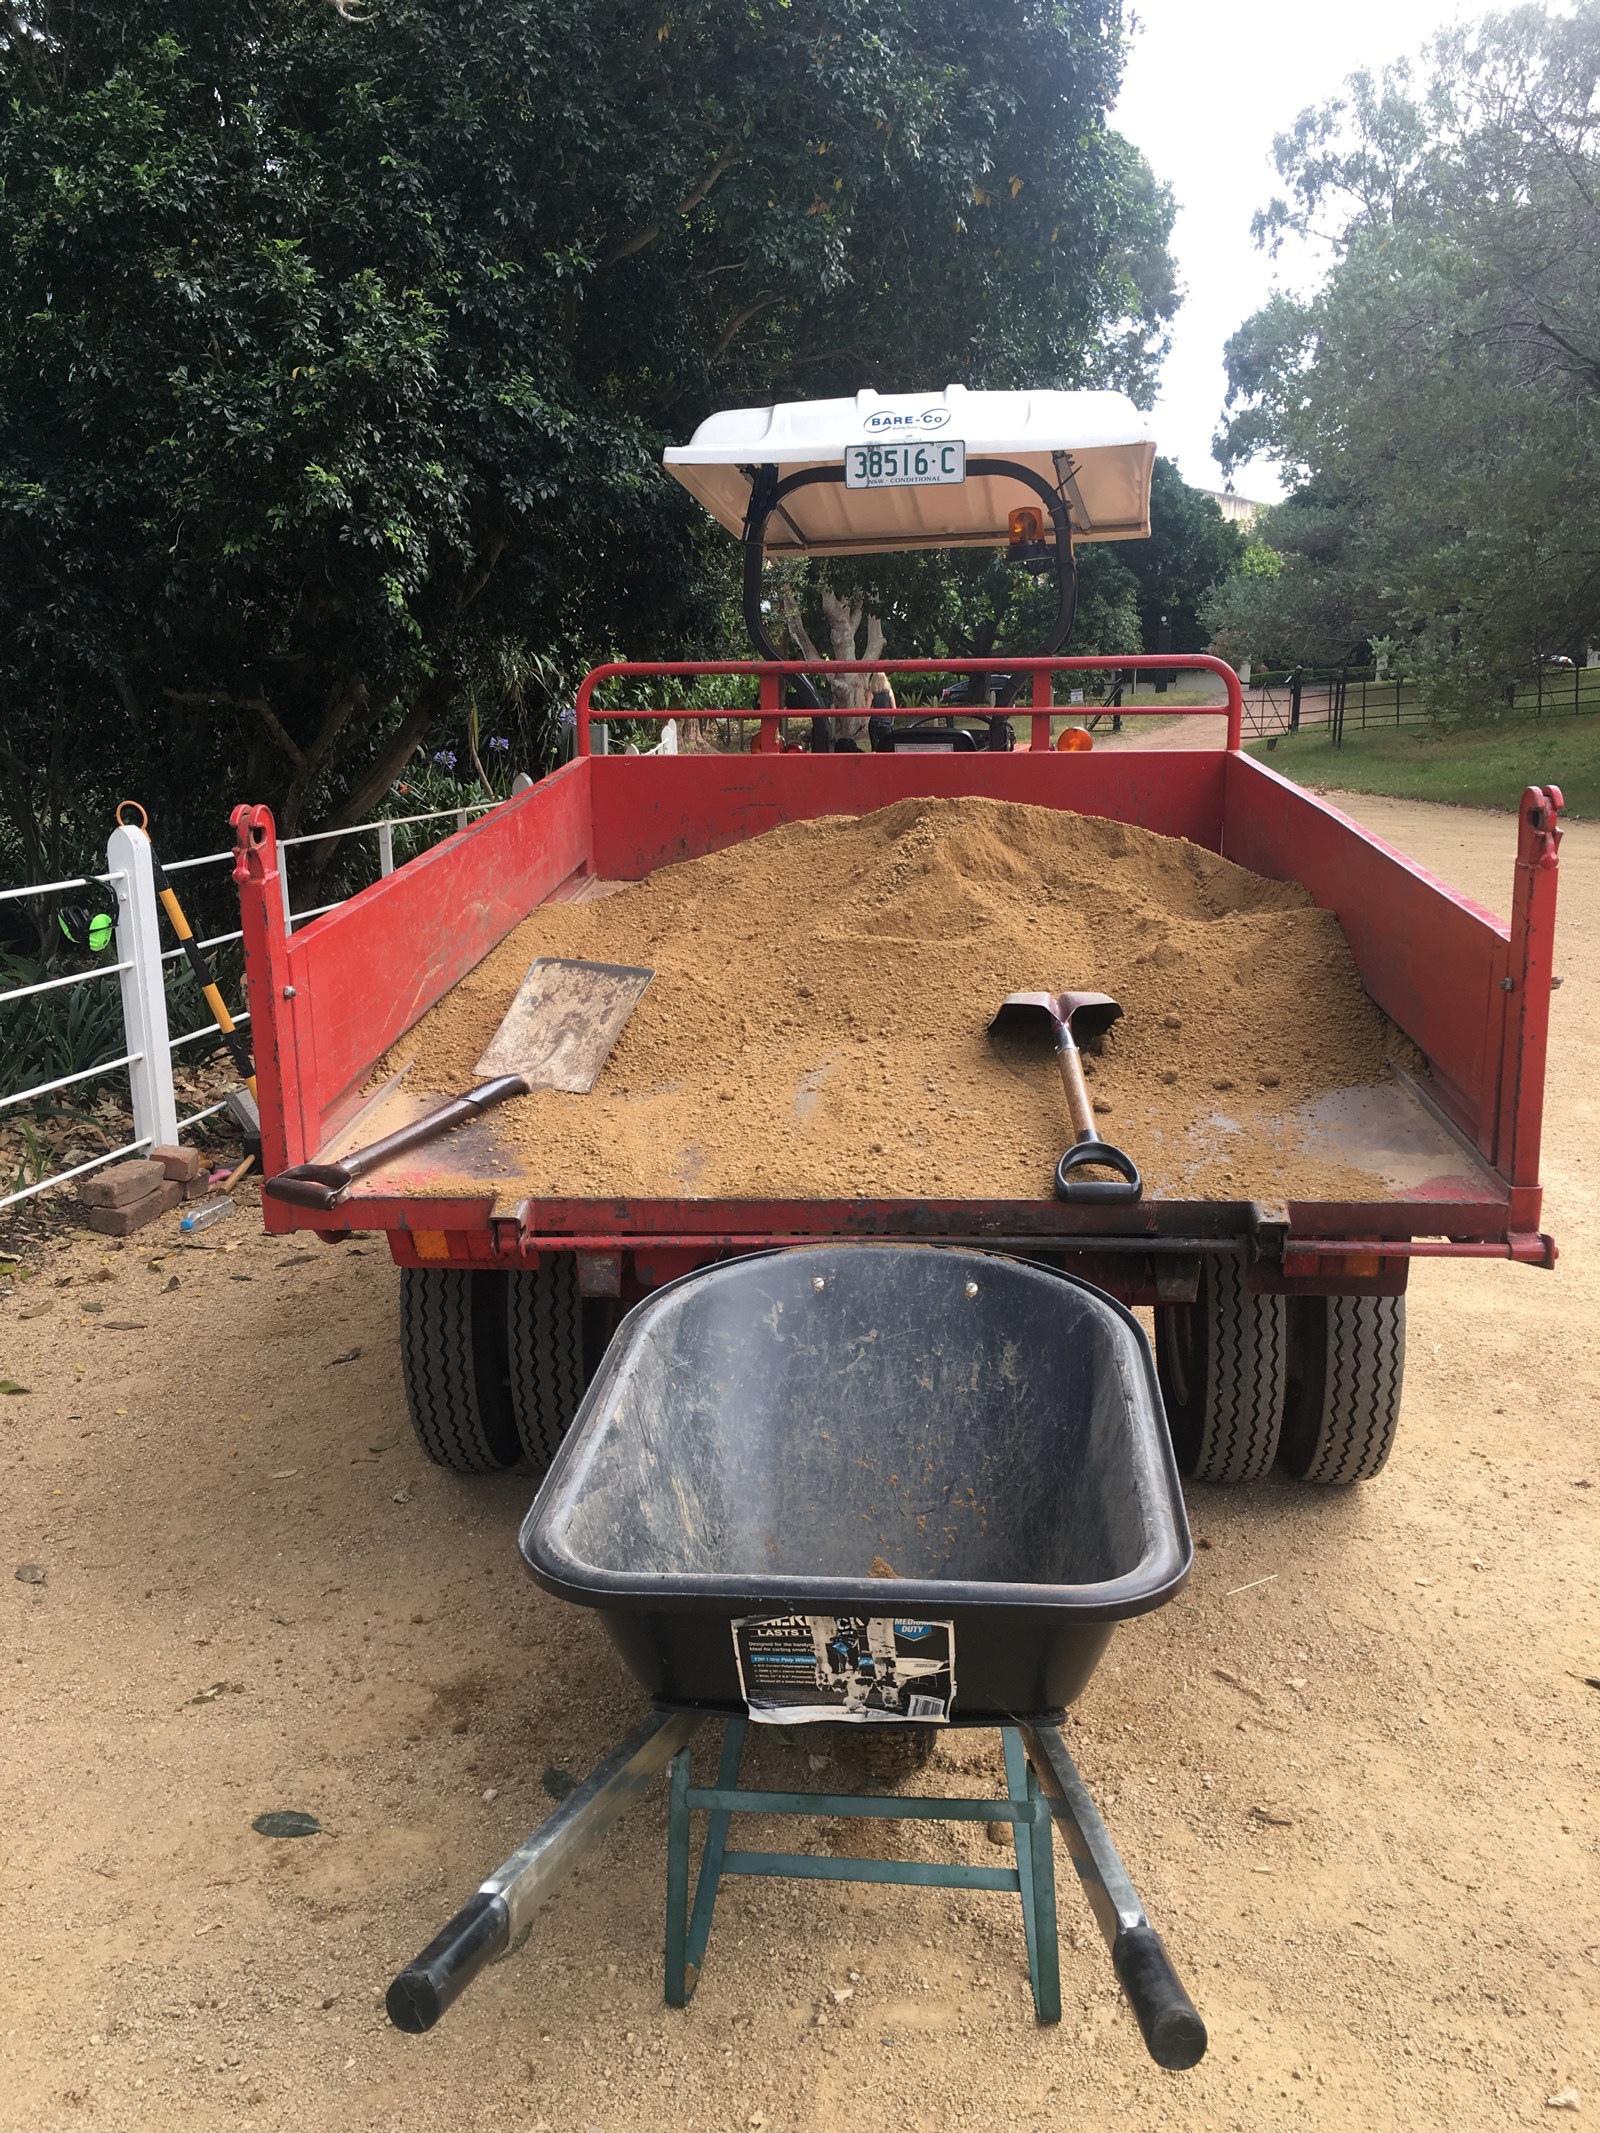 An empty wheelbarrow sits waiting to be filled with gravel from the tractor